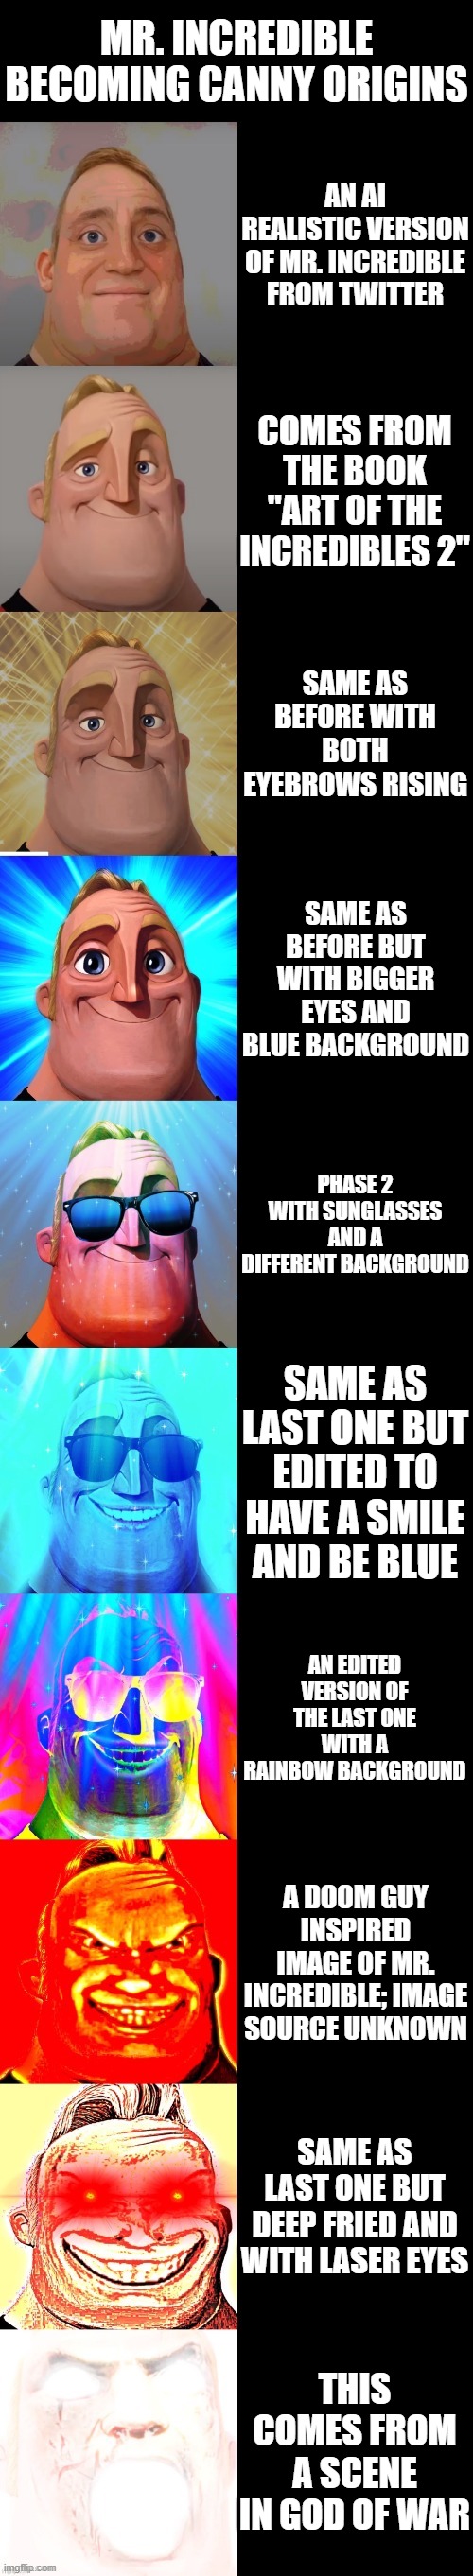 I see someone else did uncanny. | MR. INCREDIBLE BECOMING CANNY ORIGINS; AN AI REALISTIC VERSION OF MR. INCREDIBLE FROM TWITTER; COMES FROM THE BOOK "ART OF THE INCREDIBLES 2"; SAME AS BEFORE WITH BOTH EYEBROWS RISING; SAME AS BEFORE BUT WITH BIGGER EYES AND BLUE BACKGROUND; PHASE 2 WITH SUNGLASSES AND A DIFFERENT BACKGROUND; SAME AS LAST ONE BUT EDITED TO HAVE A SMILE AND BE BLUE; AN EDITED VERSION OF THE LAST ONE WITH A RAINBOW BACKGROUND; A DOOM GUY INSPIRED IMAGE OF MR. INCREDIBLE; IMAGE SOURCE UNKNOWN; SAME AS LAST ONE BUT DEEP FRIED AND WITH LASER EYES; THIS COMES FROM A SCENE IN GOD OF WAR | image tagged in mr incredible becoming canny,memes,mr incredible,stop reading the tags,or,barney will eat all of your delectable biscuits | made w/ Imgflip meme maker